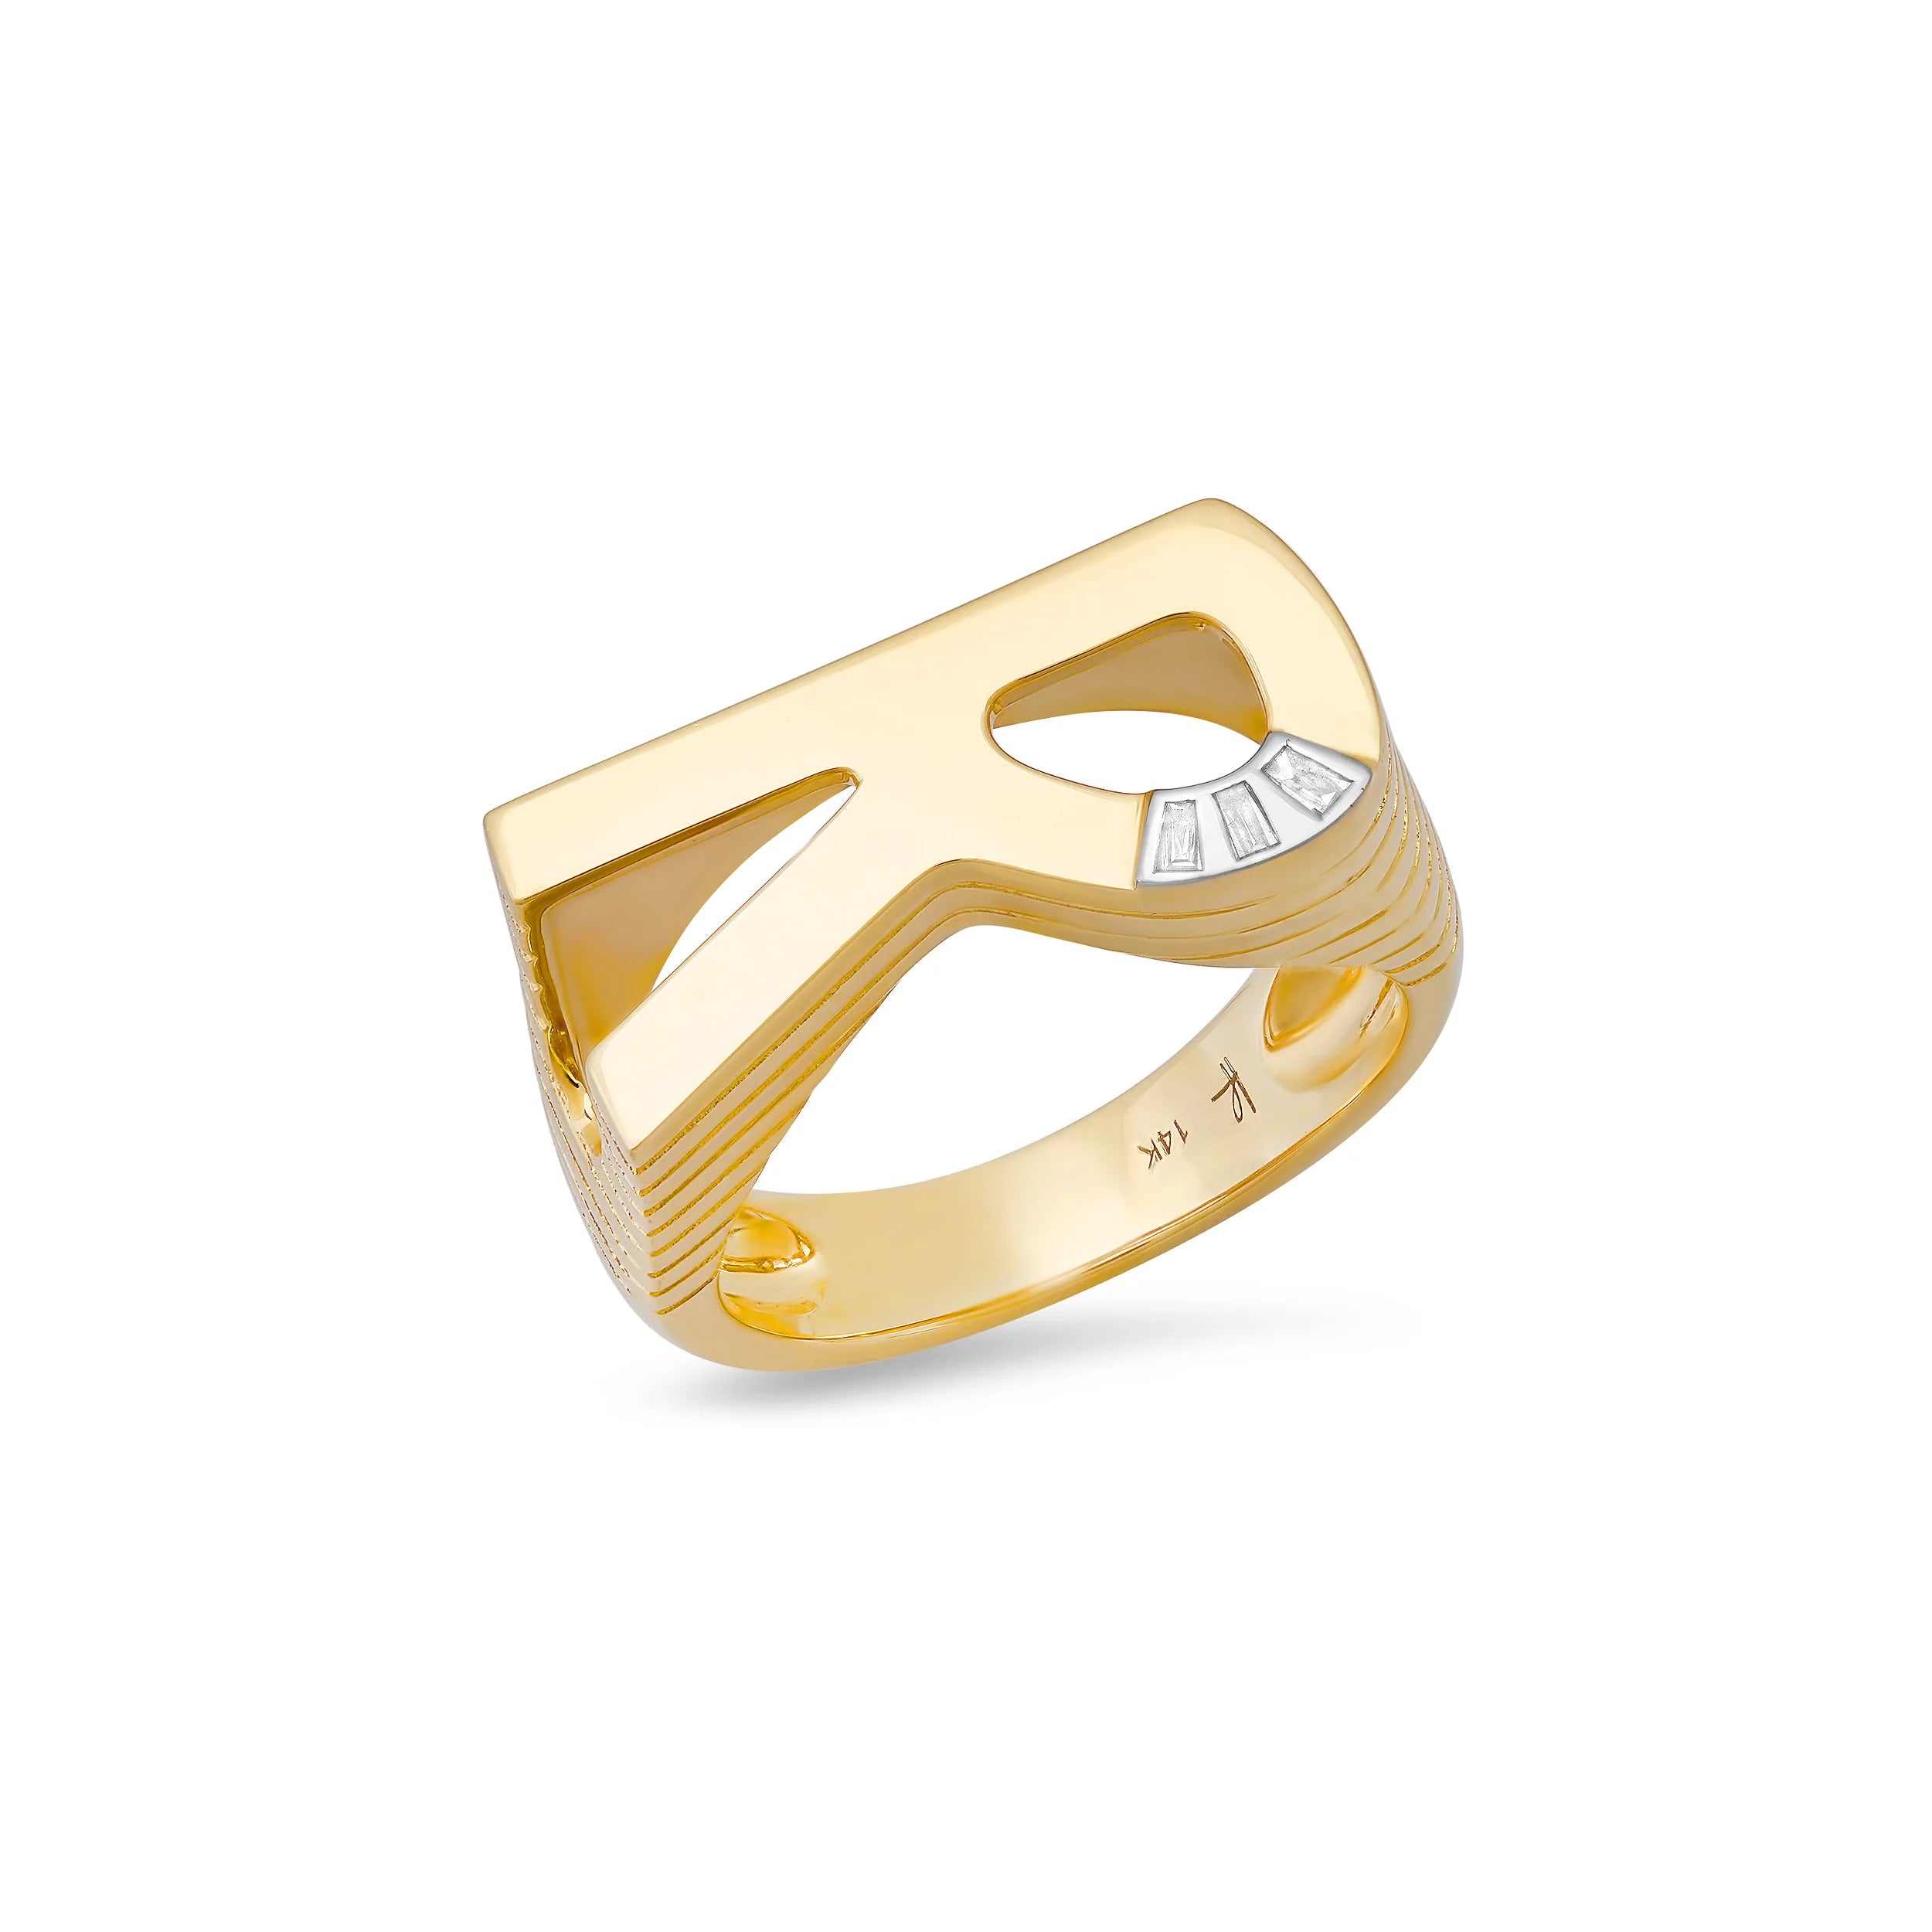 Grandsize Chunky Initial Baguette Diamond Stacking Ring